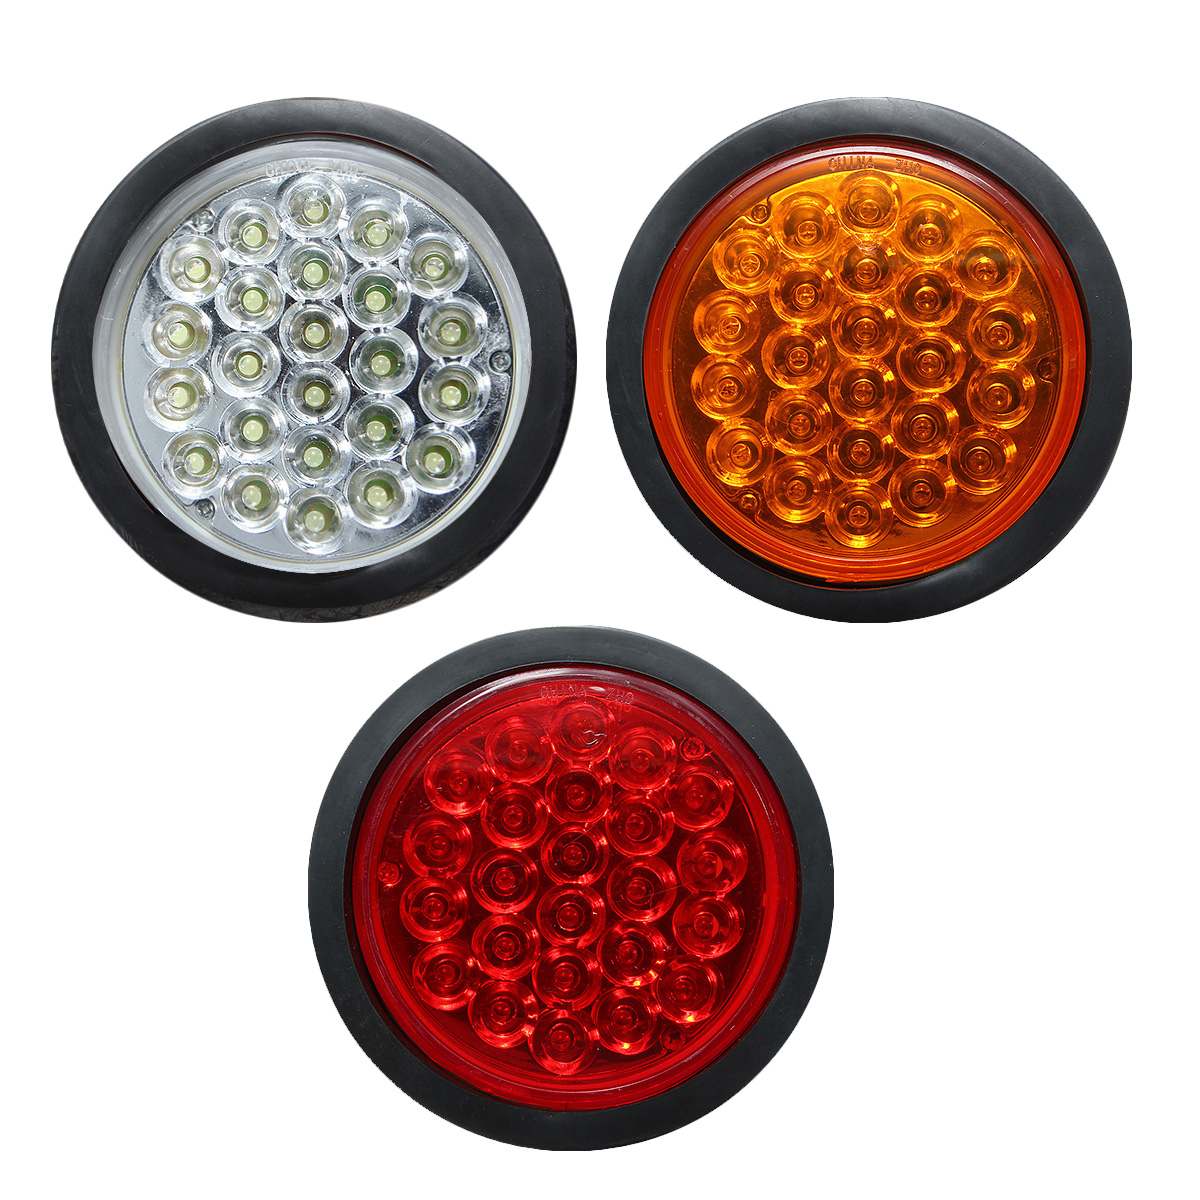 1x Rear Tail Brake Stop Marker Light Indicator Car Truck Trailer LEDS Round Reflector Red Yellow White 24V - Price history & Review | AliExpress Seller - Caberre Official Store | Alitools.io